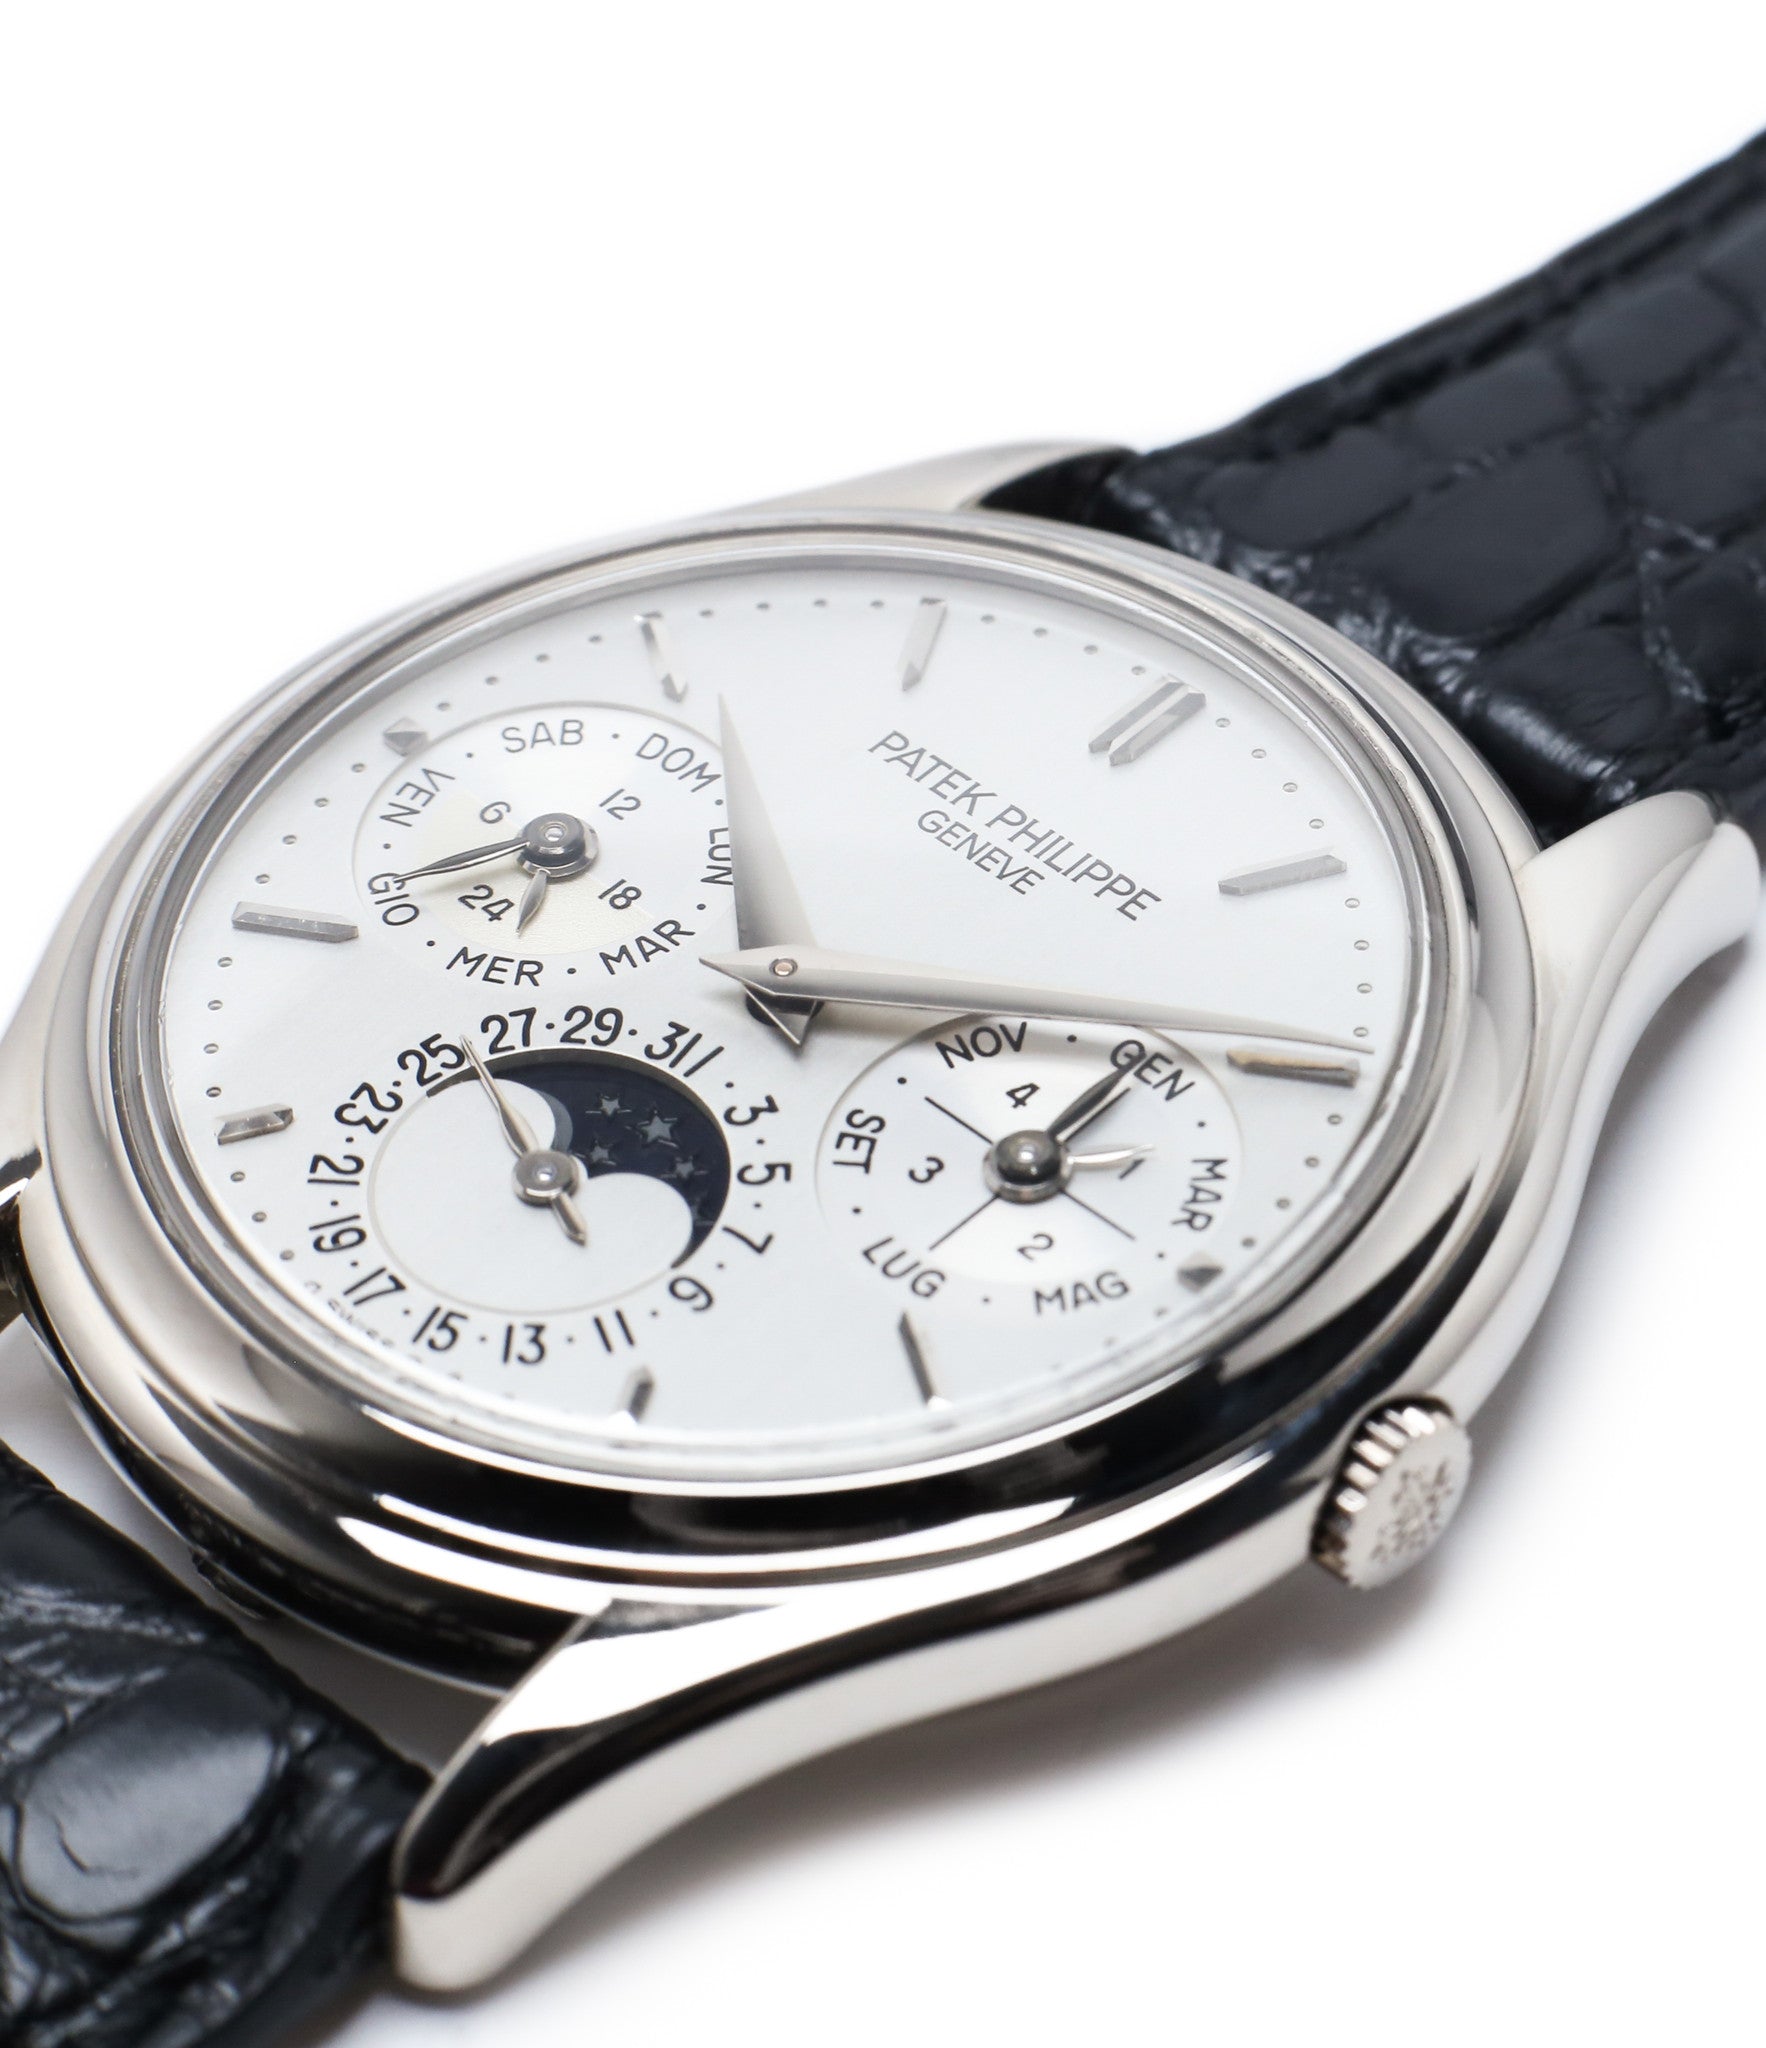 slim case buy rare Patek Philippe Perpetual Calendar 3940G moonphase white gold watch full set at A Collected Man